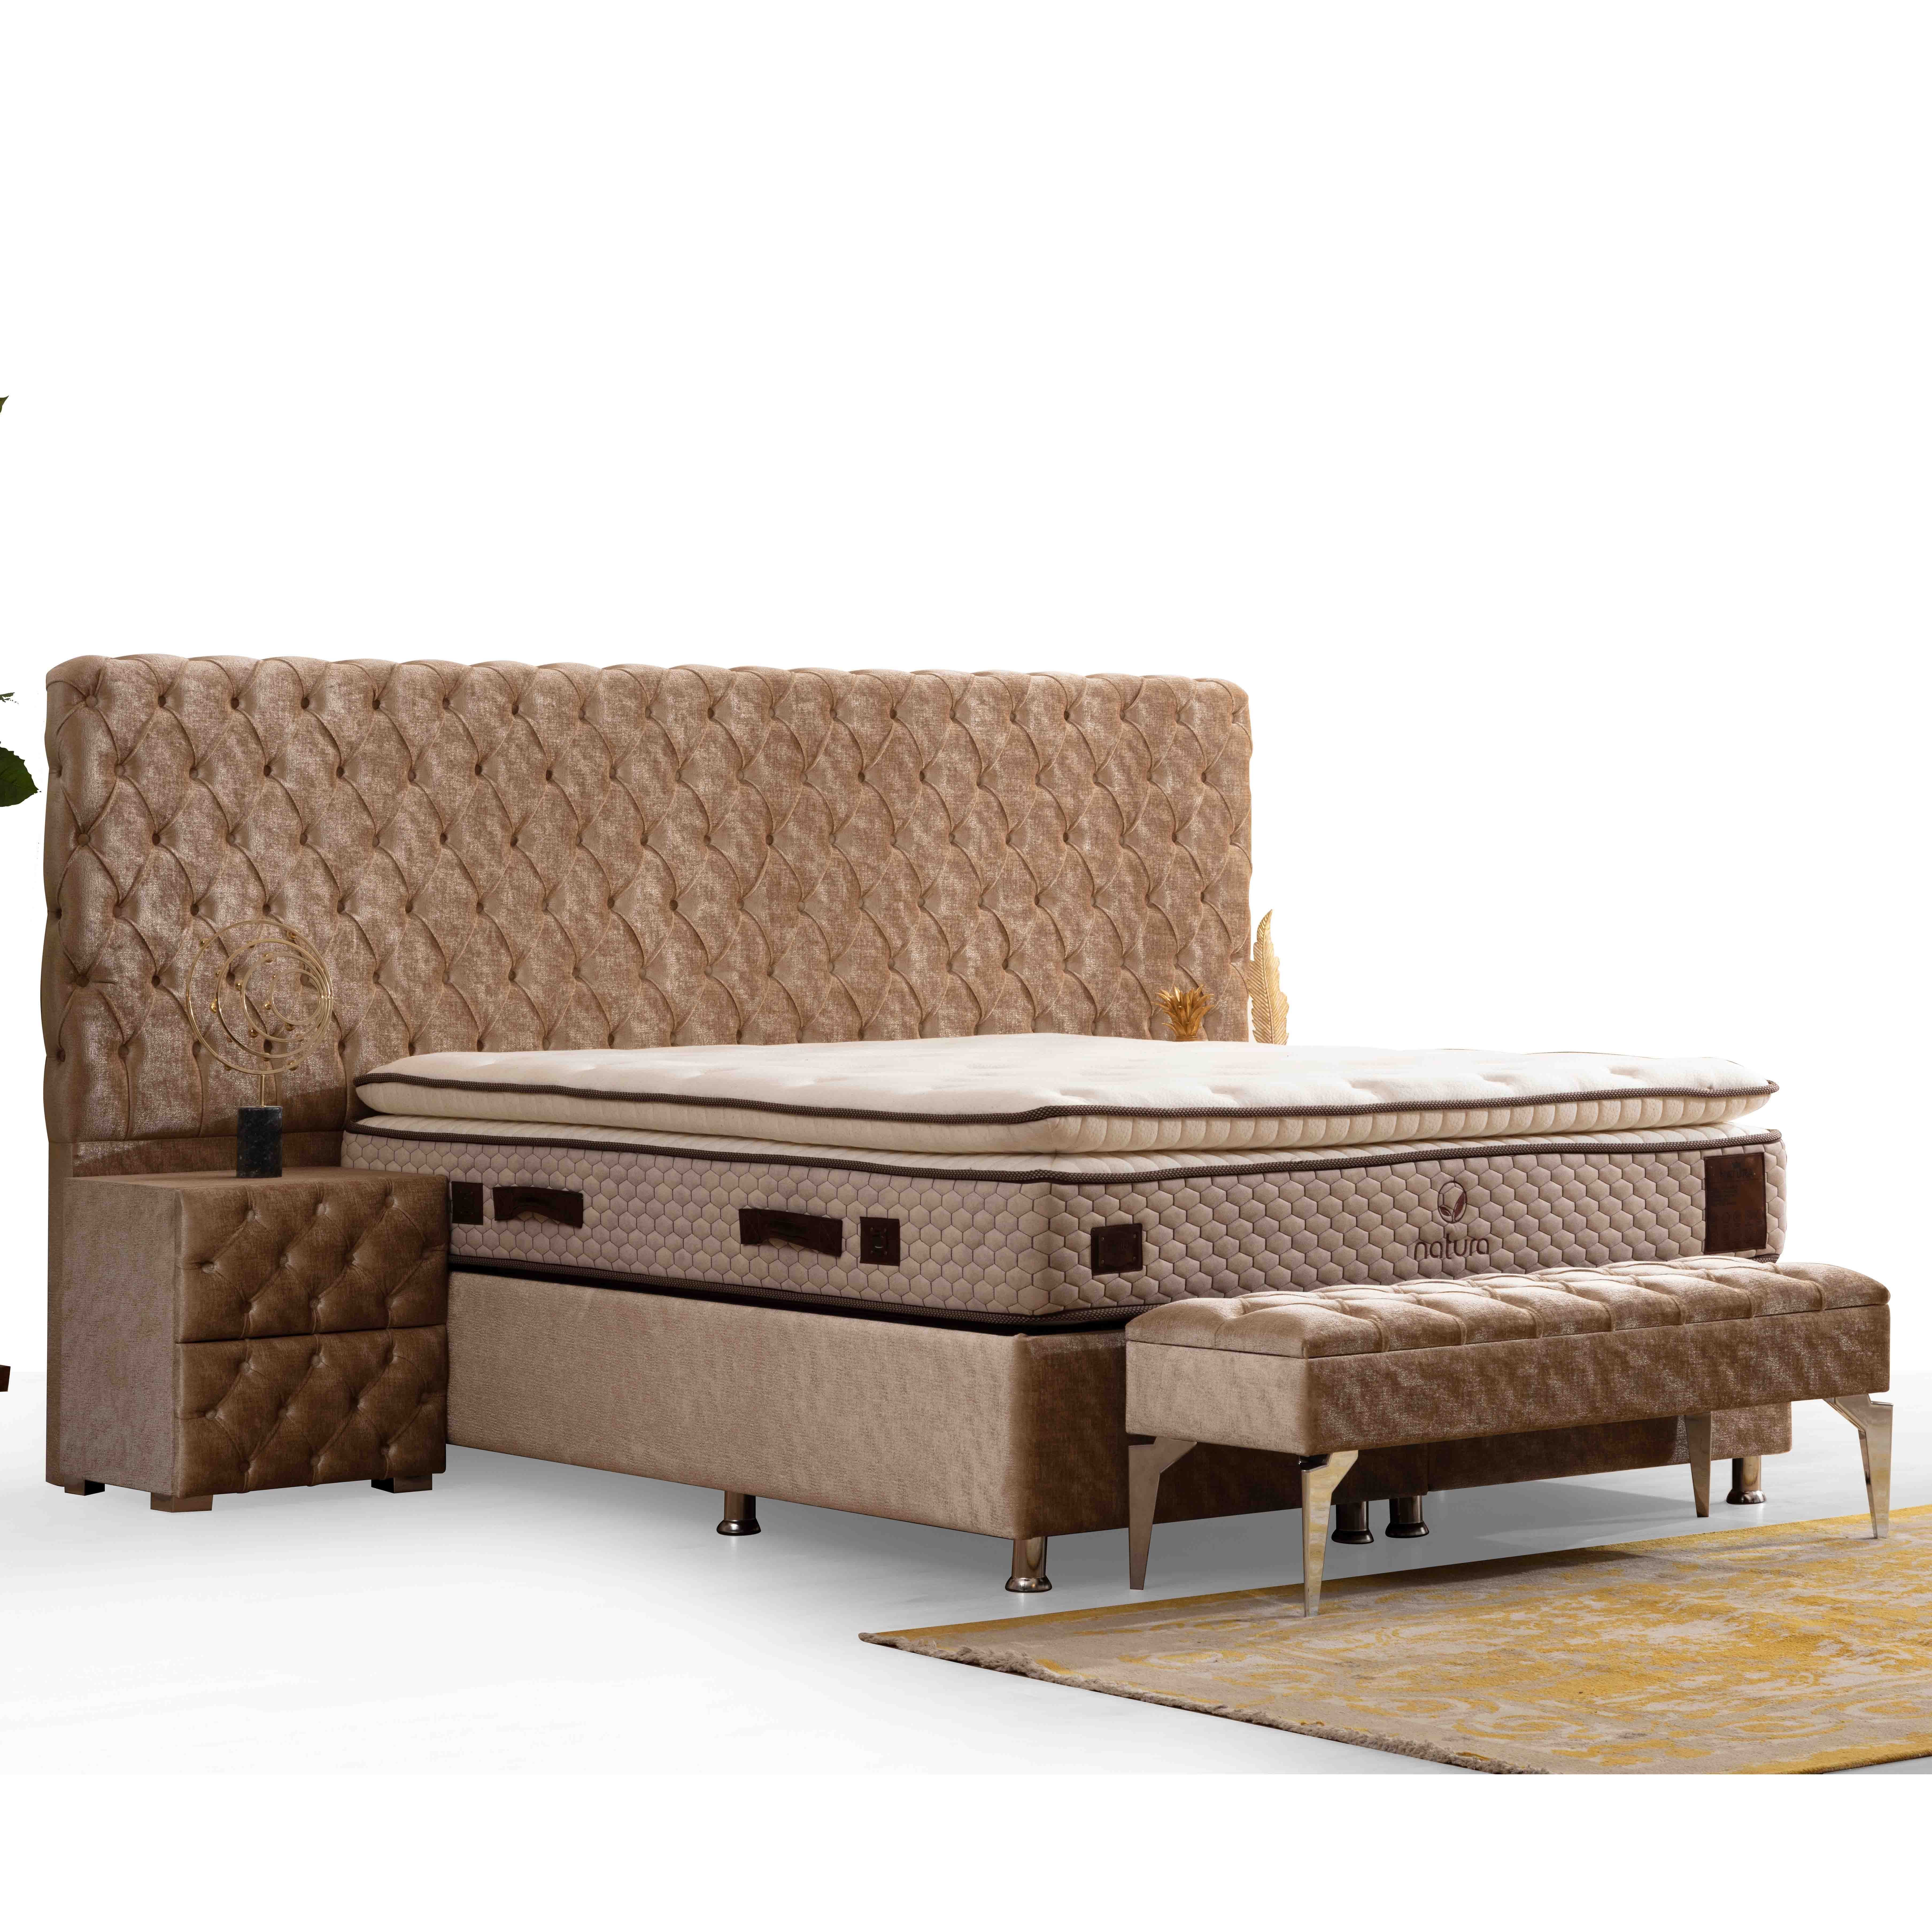 Siena Bed With Storage 90*190